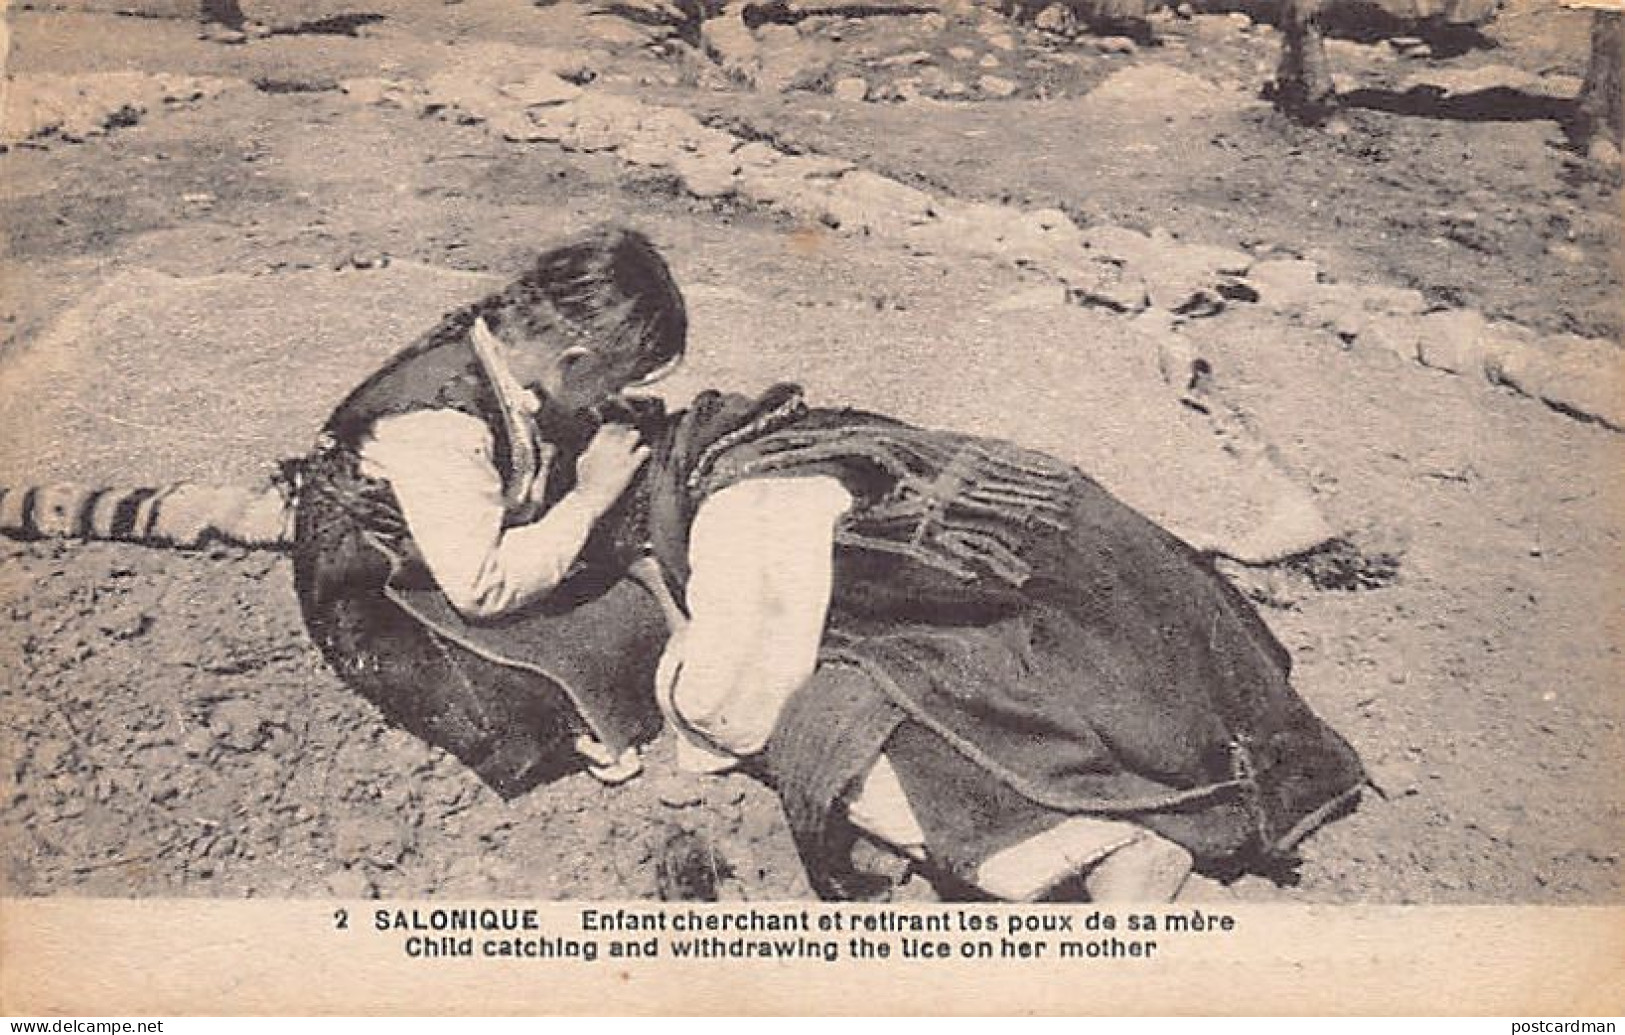 Greece - SALONICA - Child Catching The Lice On Her Mother - Publ. Papeterie Marisienne 2 - Griechenland